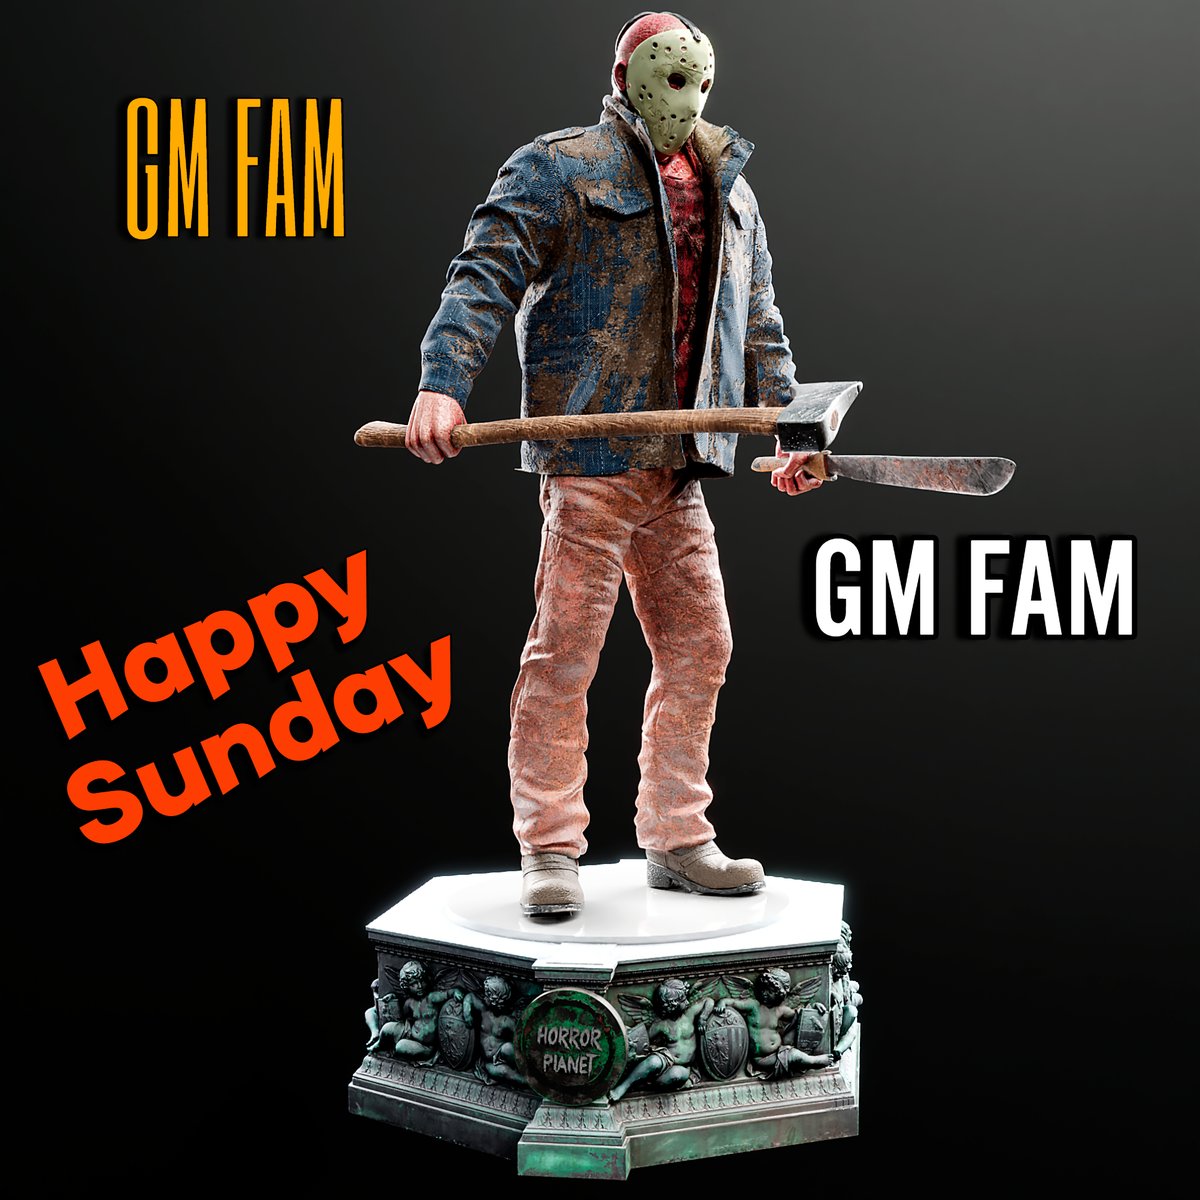 GM Fam X. Sunday is the perfect day to delve into the world of horror. Say hello to your favorite horror characters, if only because of common fears - today we're going to show that the real horror lives inside of us! #Horrorfam #HorrorFanatics #HorrorGames